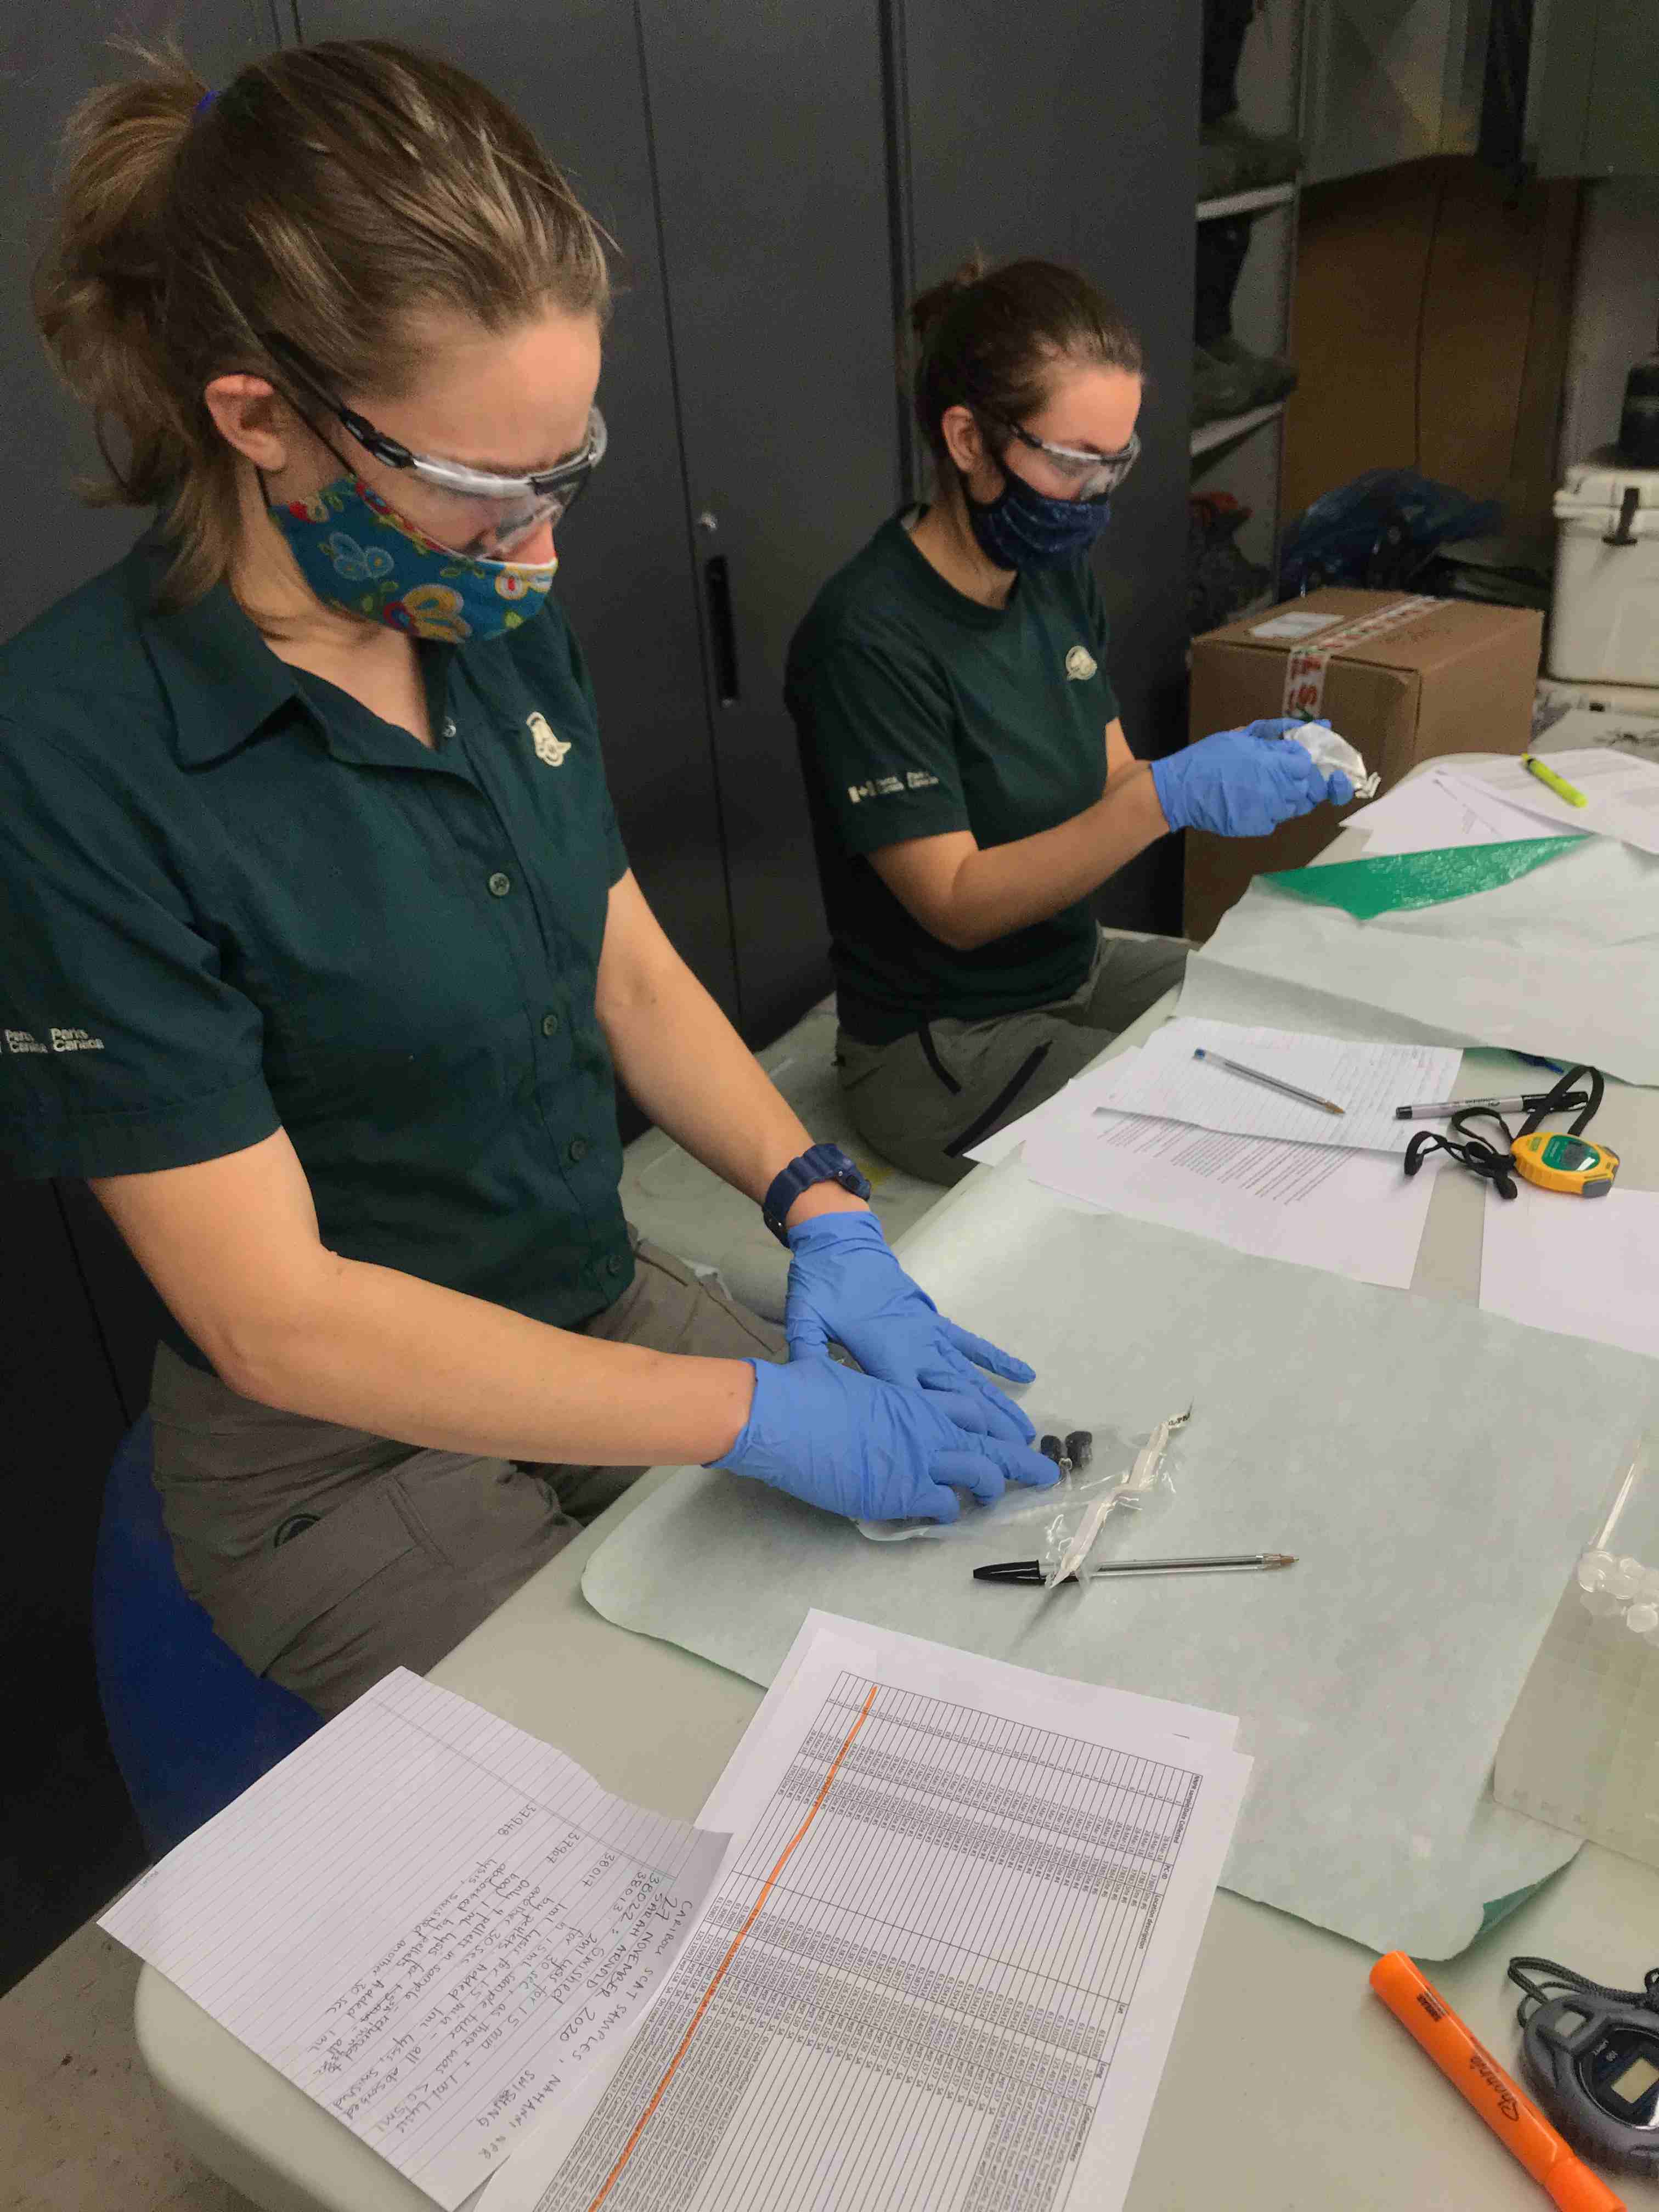 Two Parks Canada staff processes scat samples on a table with papers, pens, and measuring devices